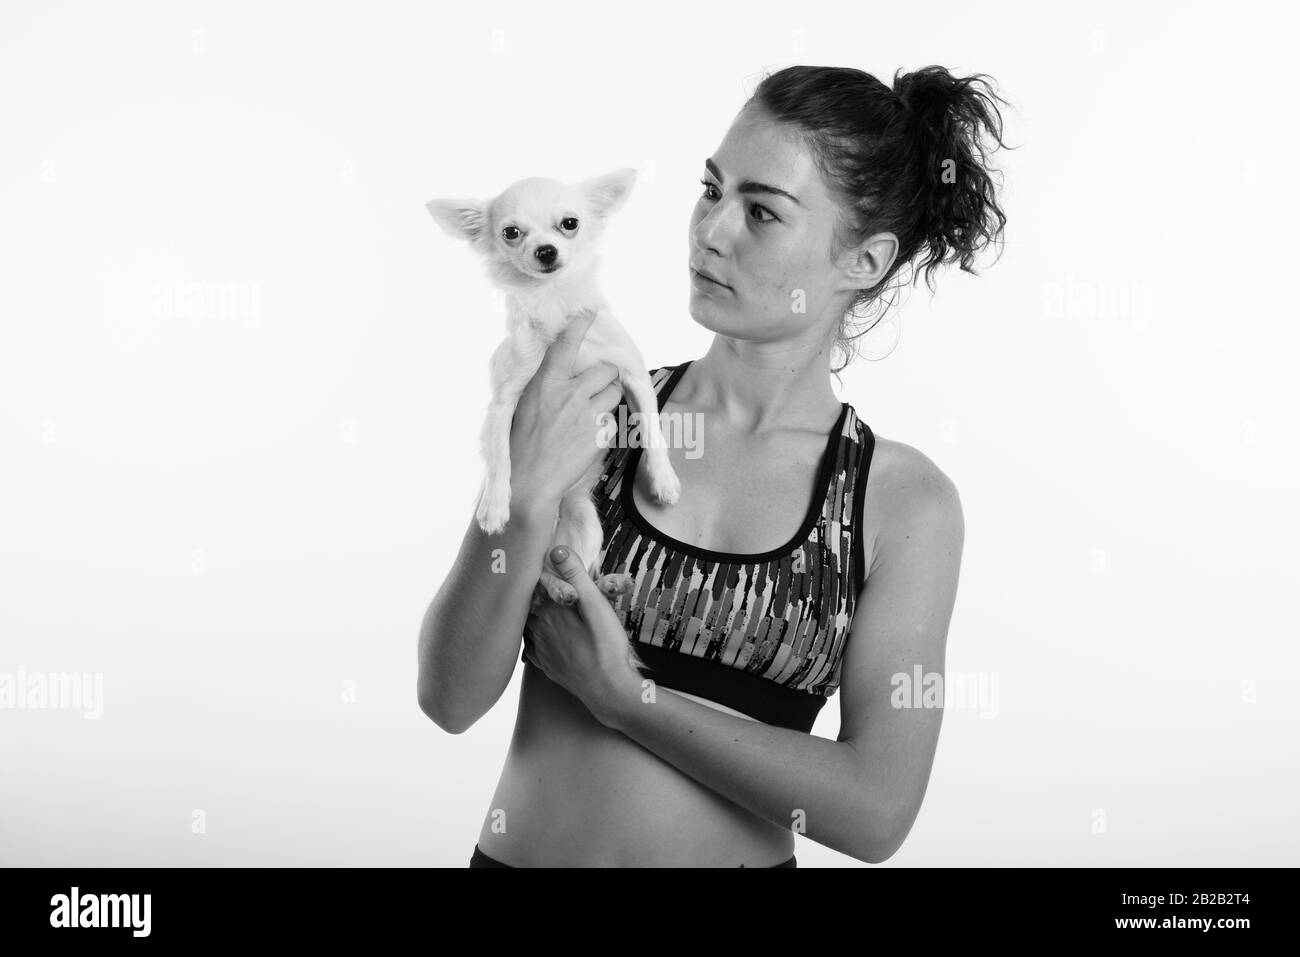 Studio shot of beautiful teenage girl holding cute dog while looking shocked ready for sports and exercise against white background Stock Photo